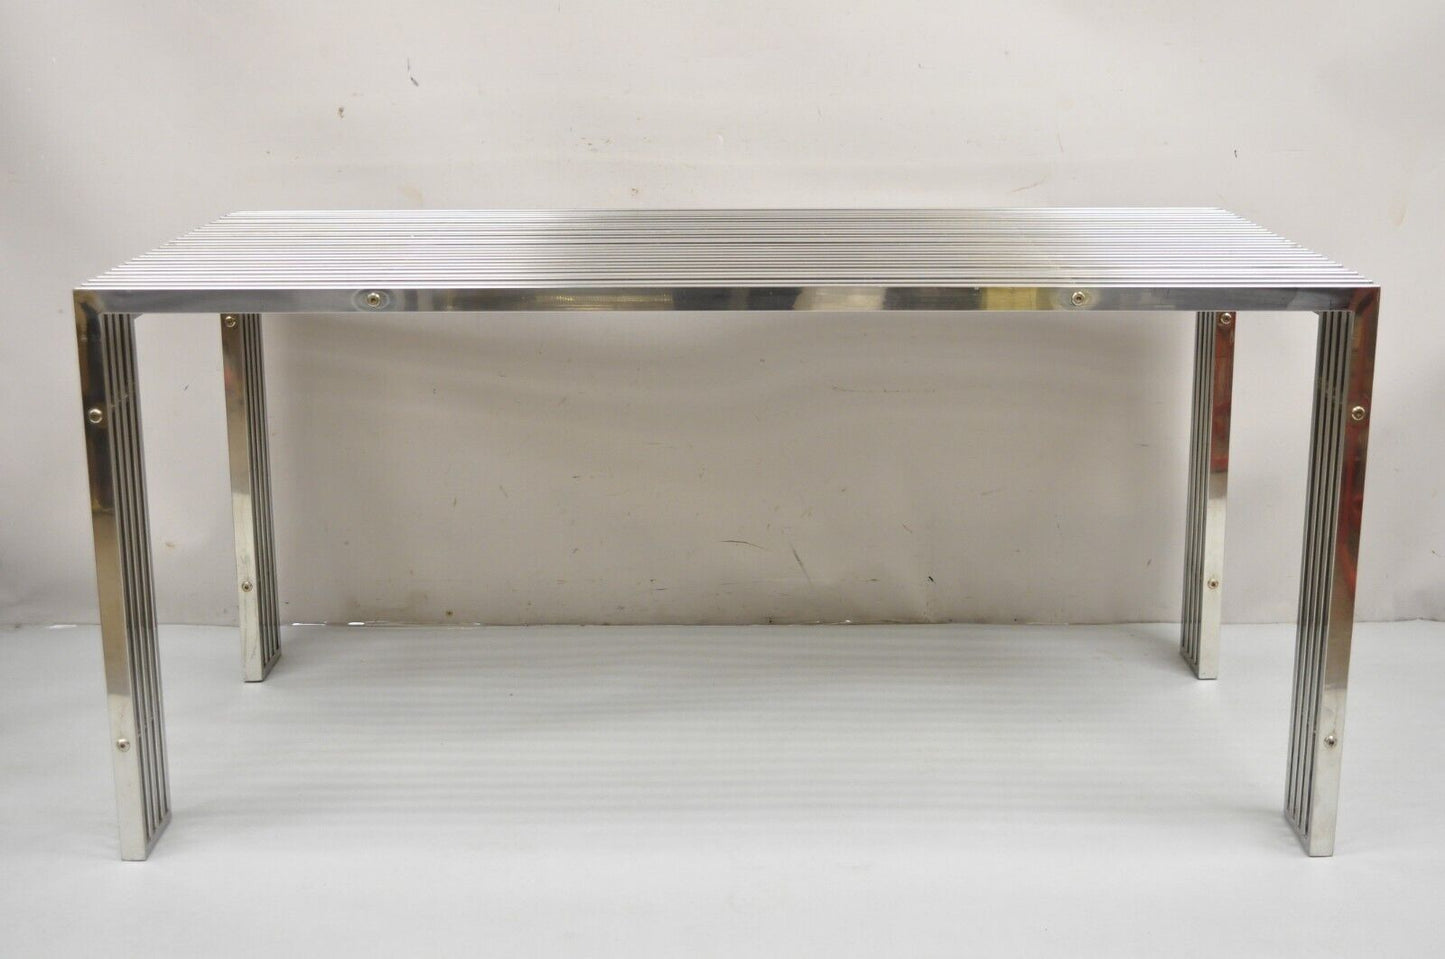 Contemporary Modern Gridiron Stainless Steel Metal Post-Modern Dining Table Desk